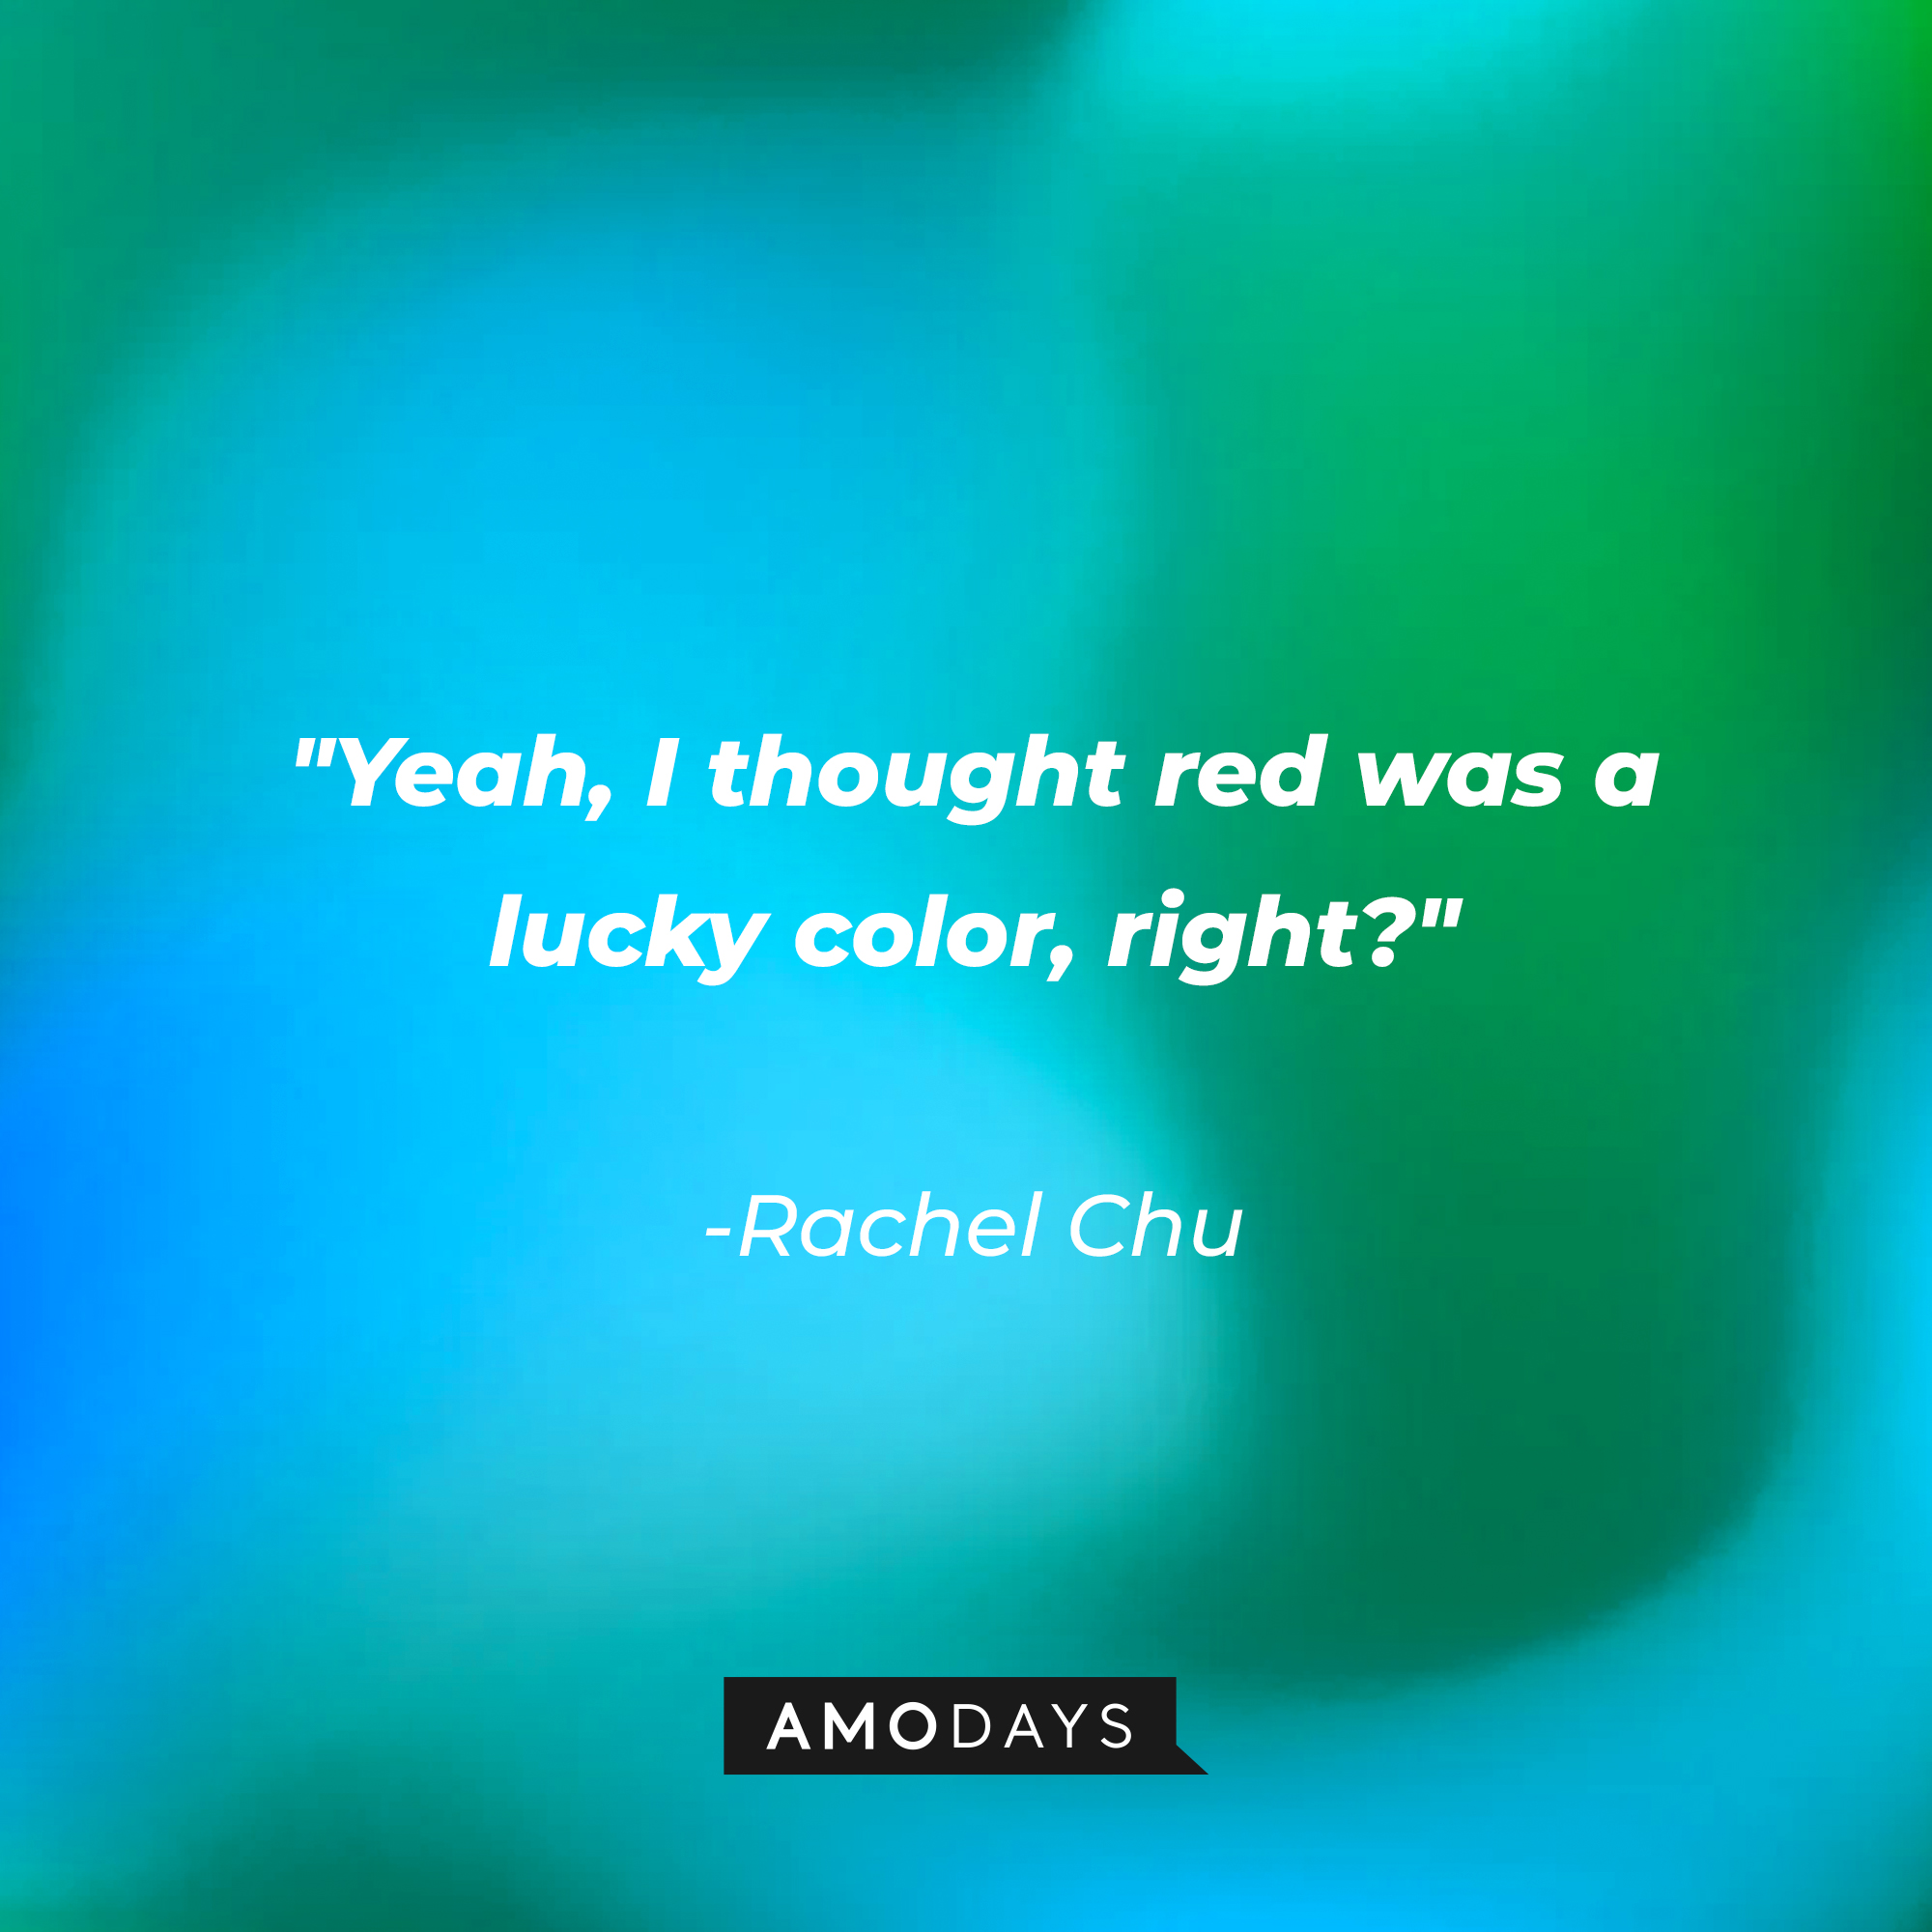 Rachel Chu's quote: "Yeah, I thought red was a lucky color, right?" | Source: AmoDays